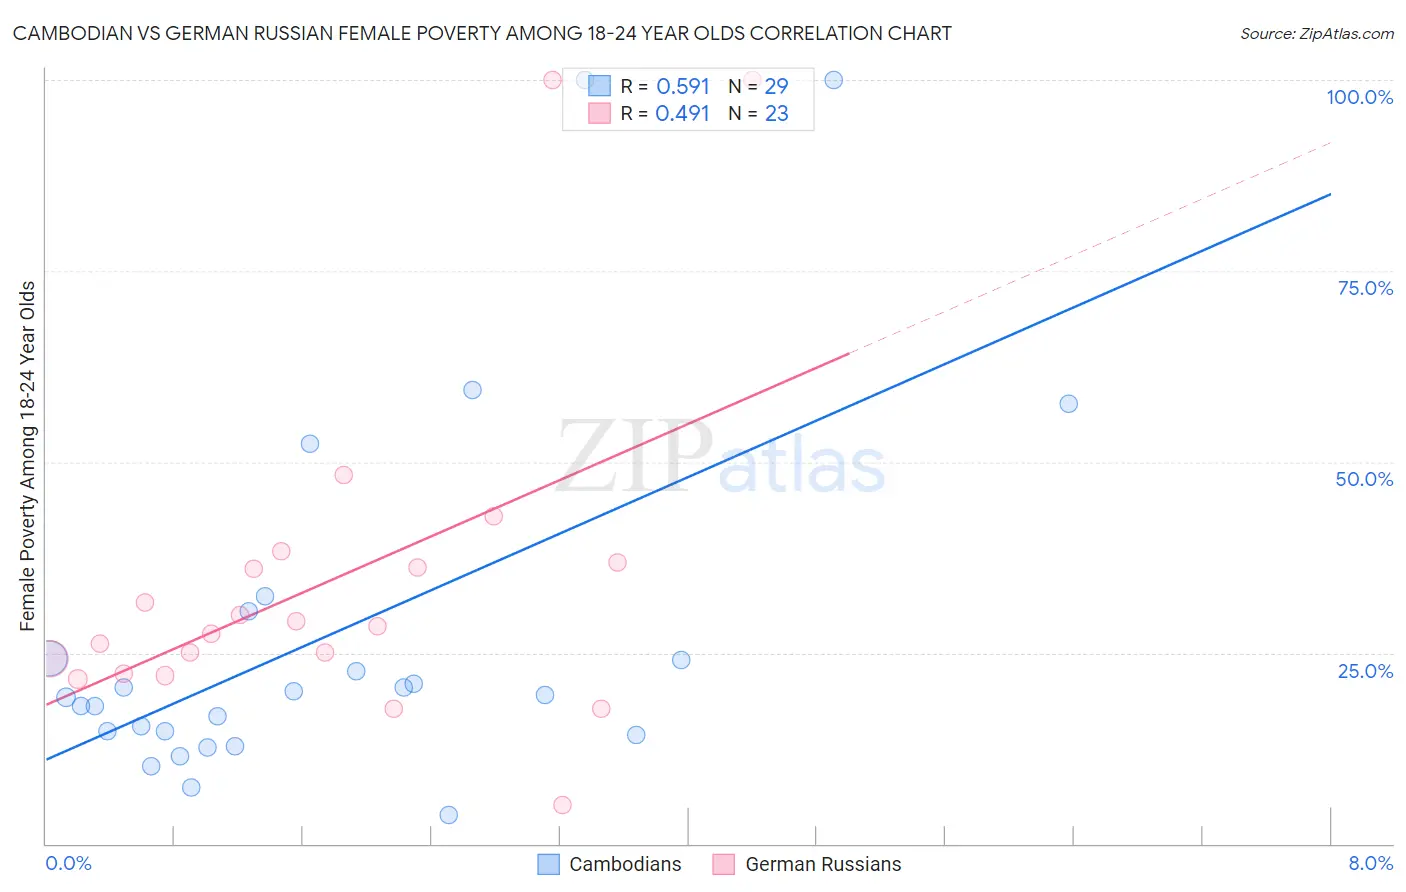 Cambodian vs German Russian Female Poverty Among 18-24 Year Olds